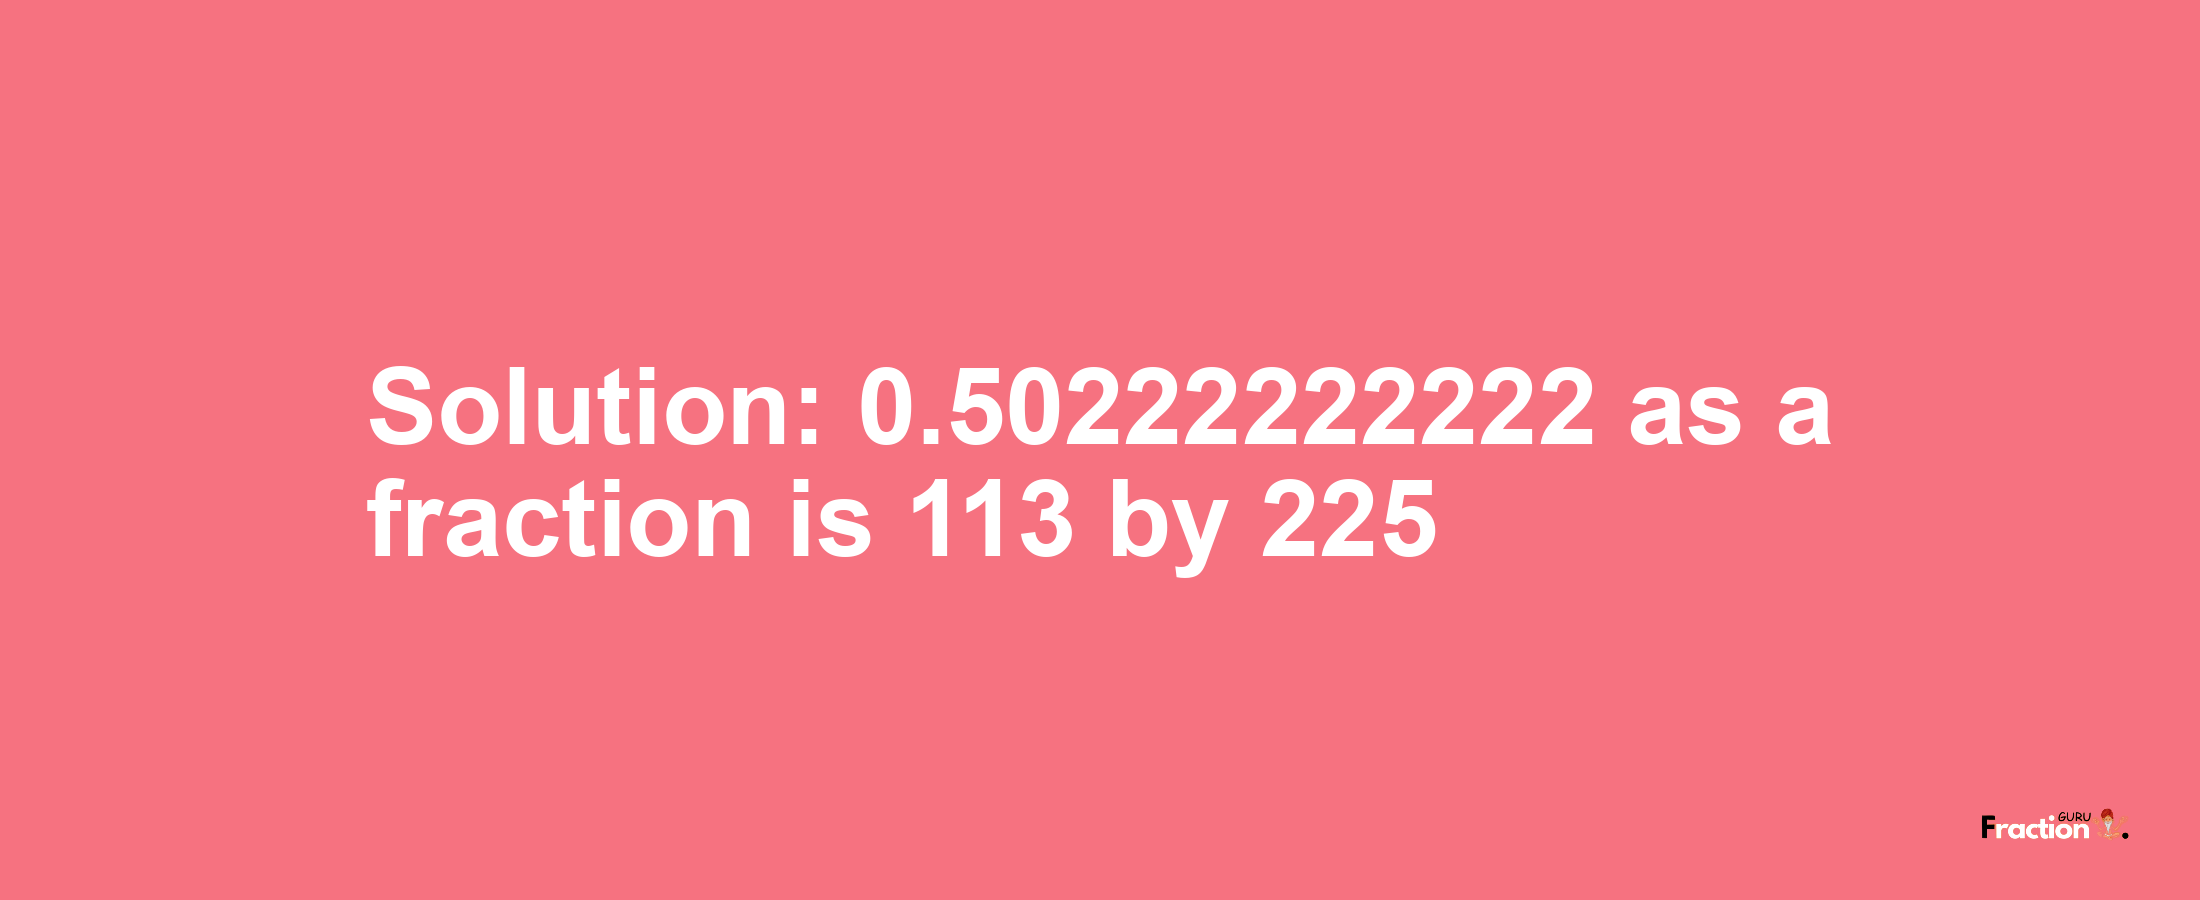 Solution:0.50222222222 as a fraction is 113/225